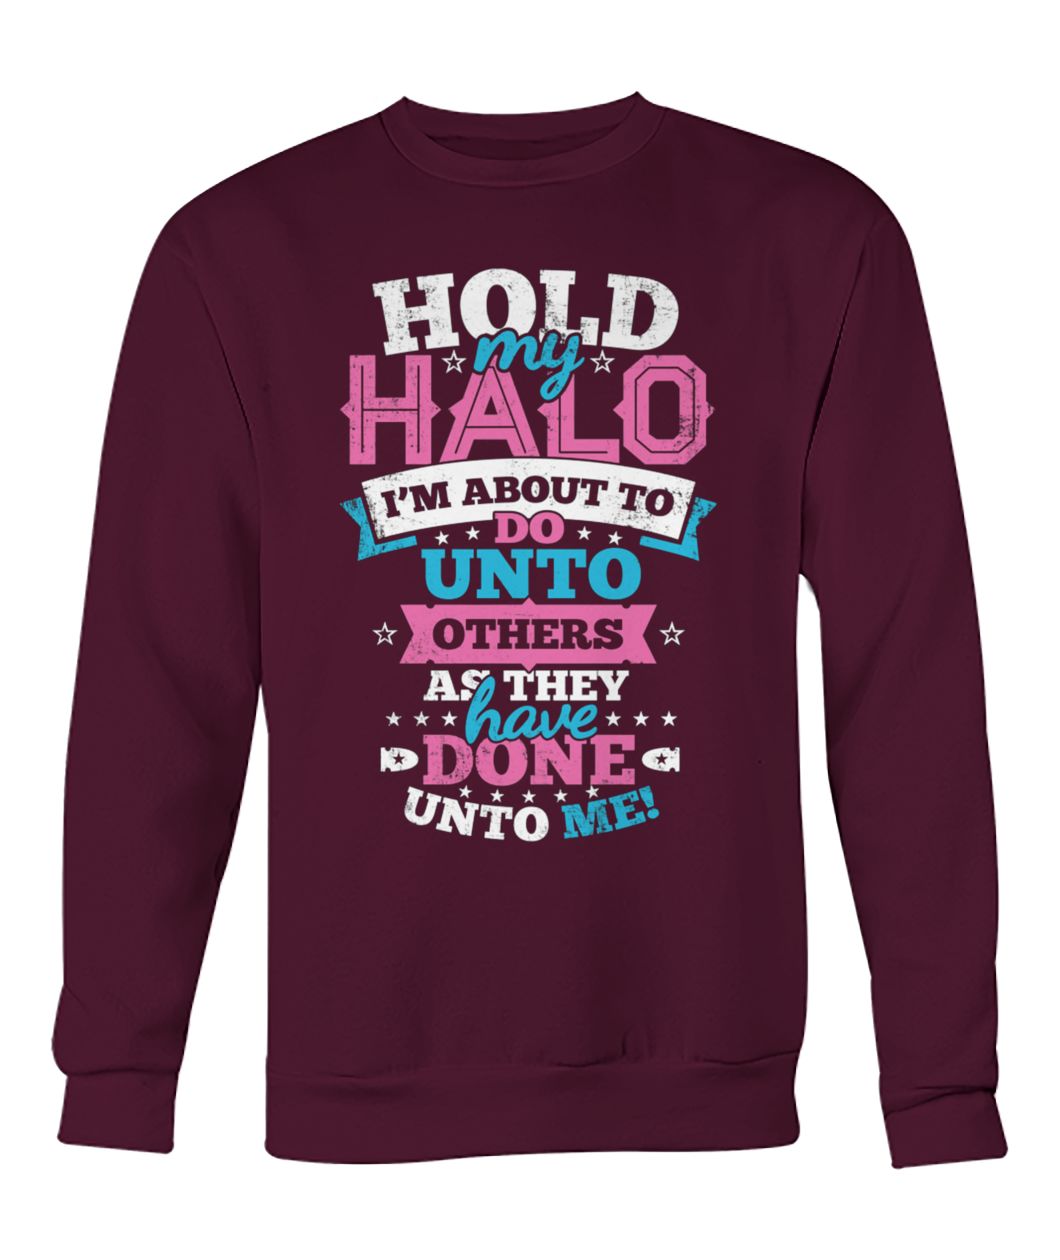 Hold my halo I'm about to do unto others as they have done unto me crew neck sweatshirt